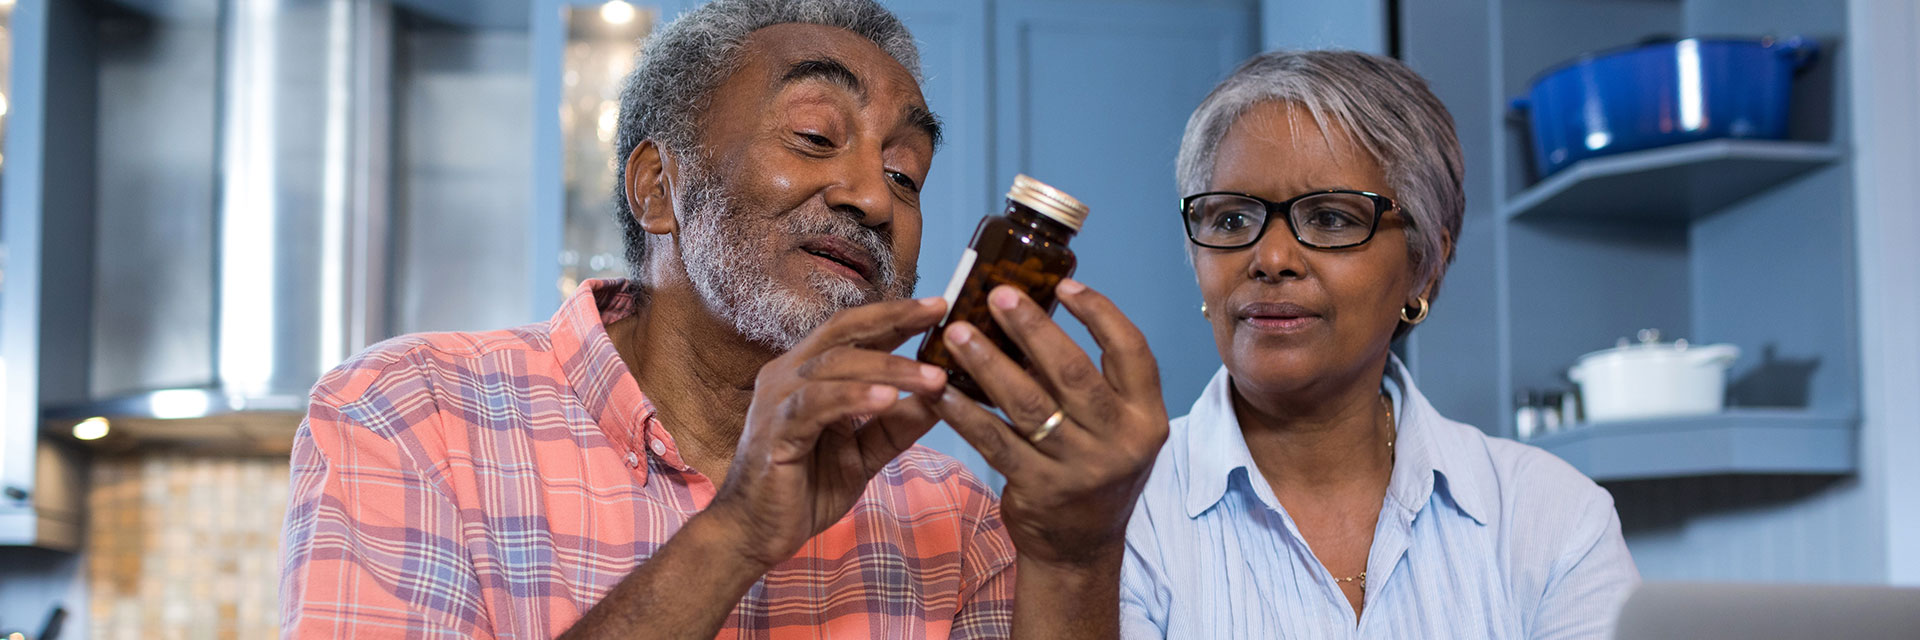 Mature Couple looking at medicine bottle